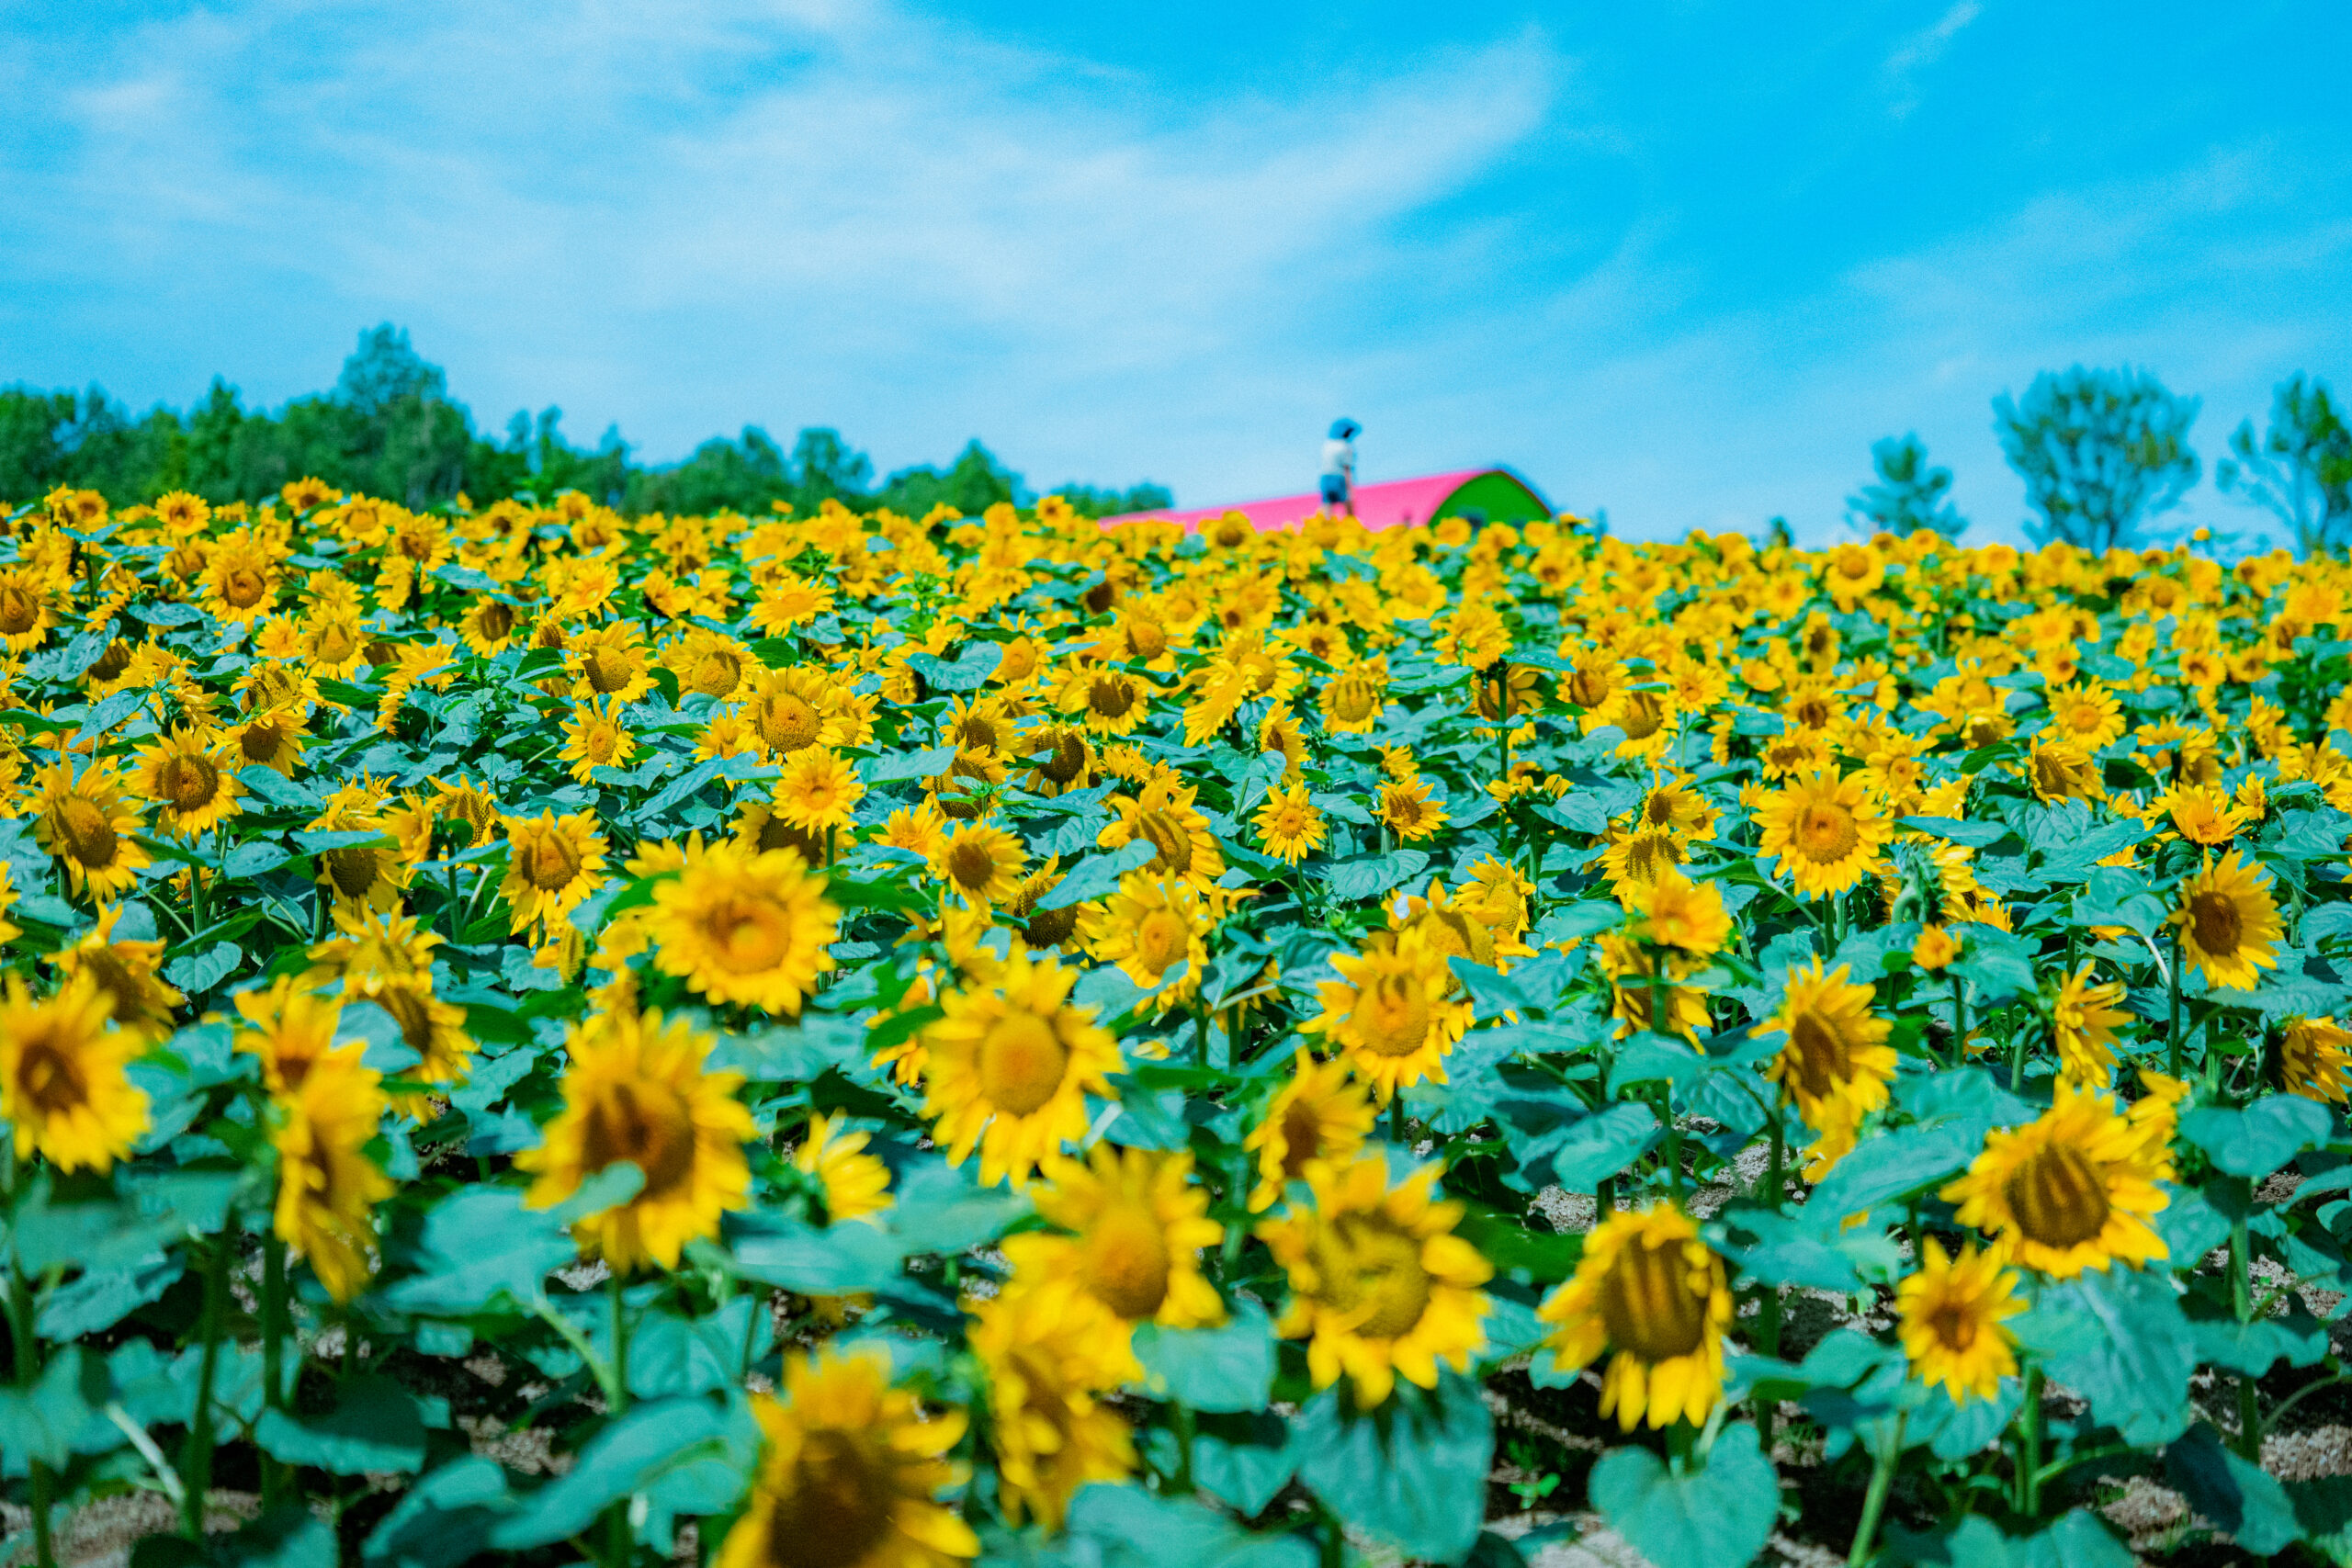 On a clear day, bright yellow sunflowers are stunningly set off by the blue sky. 